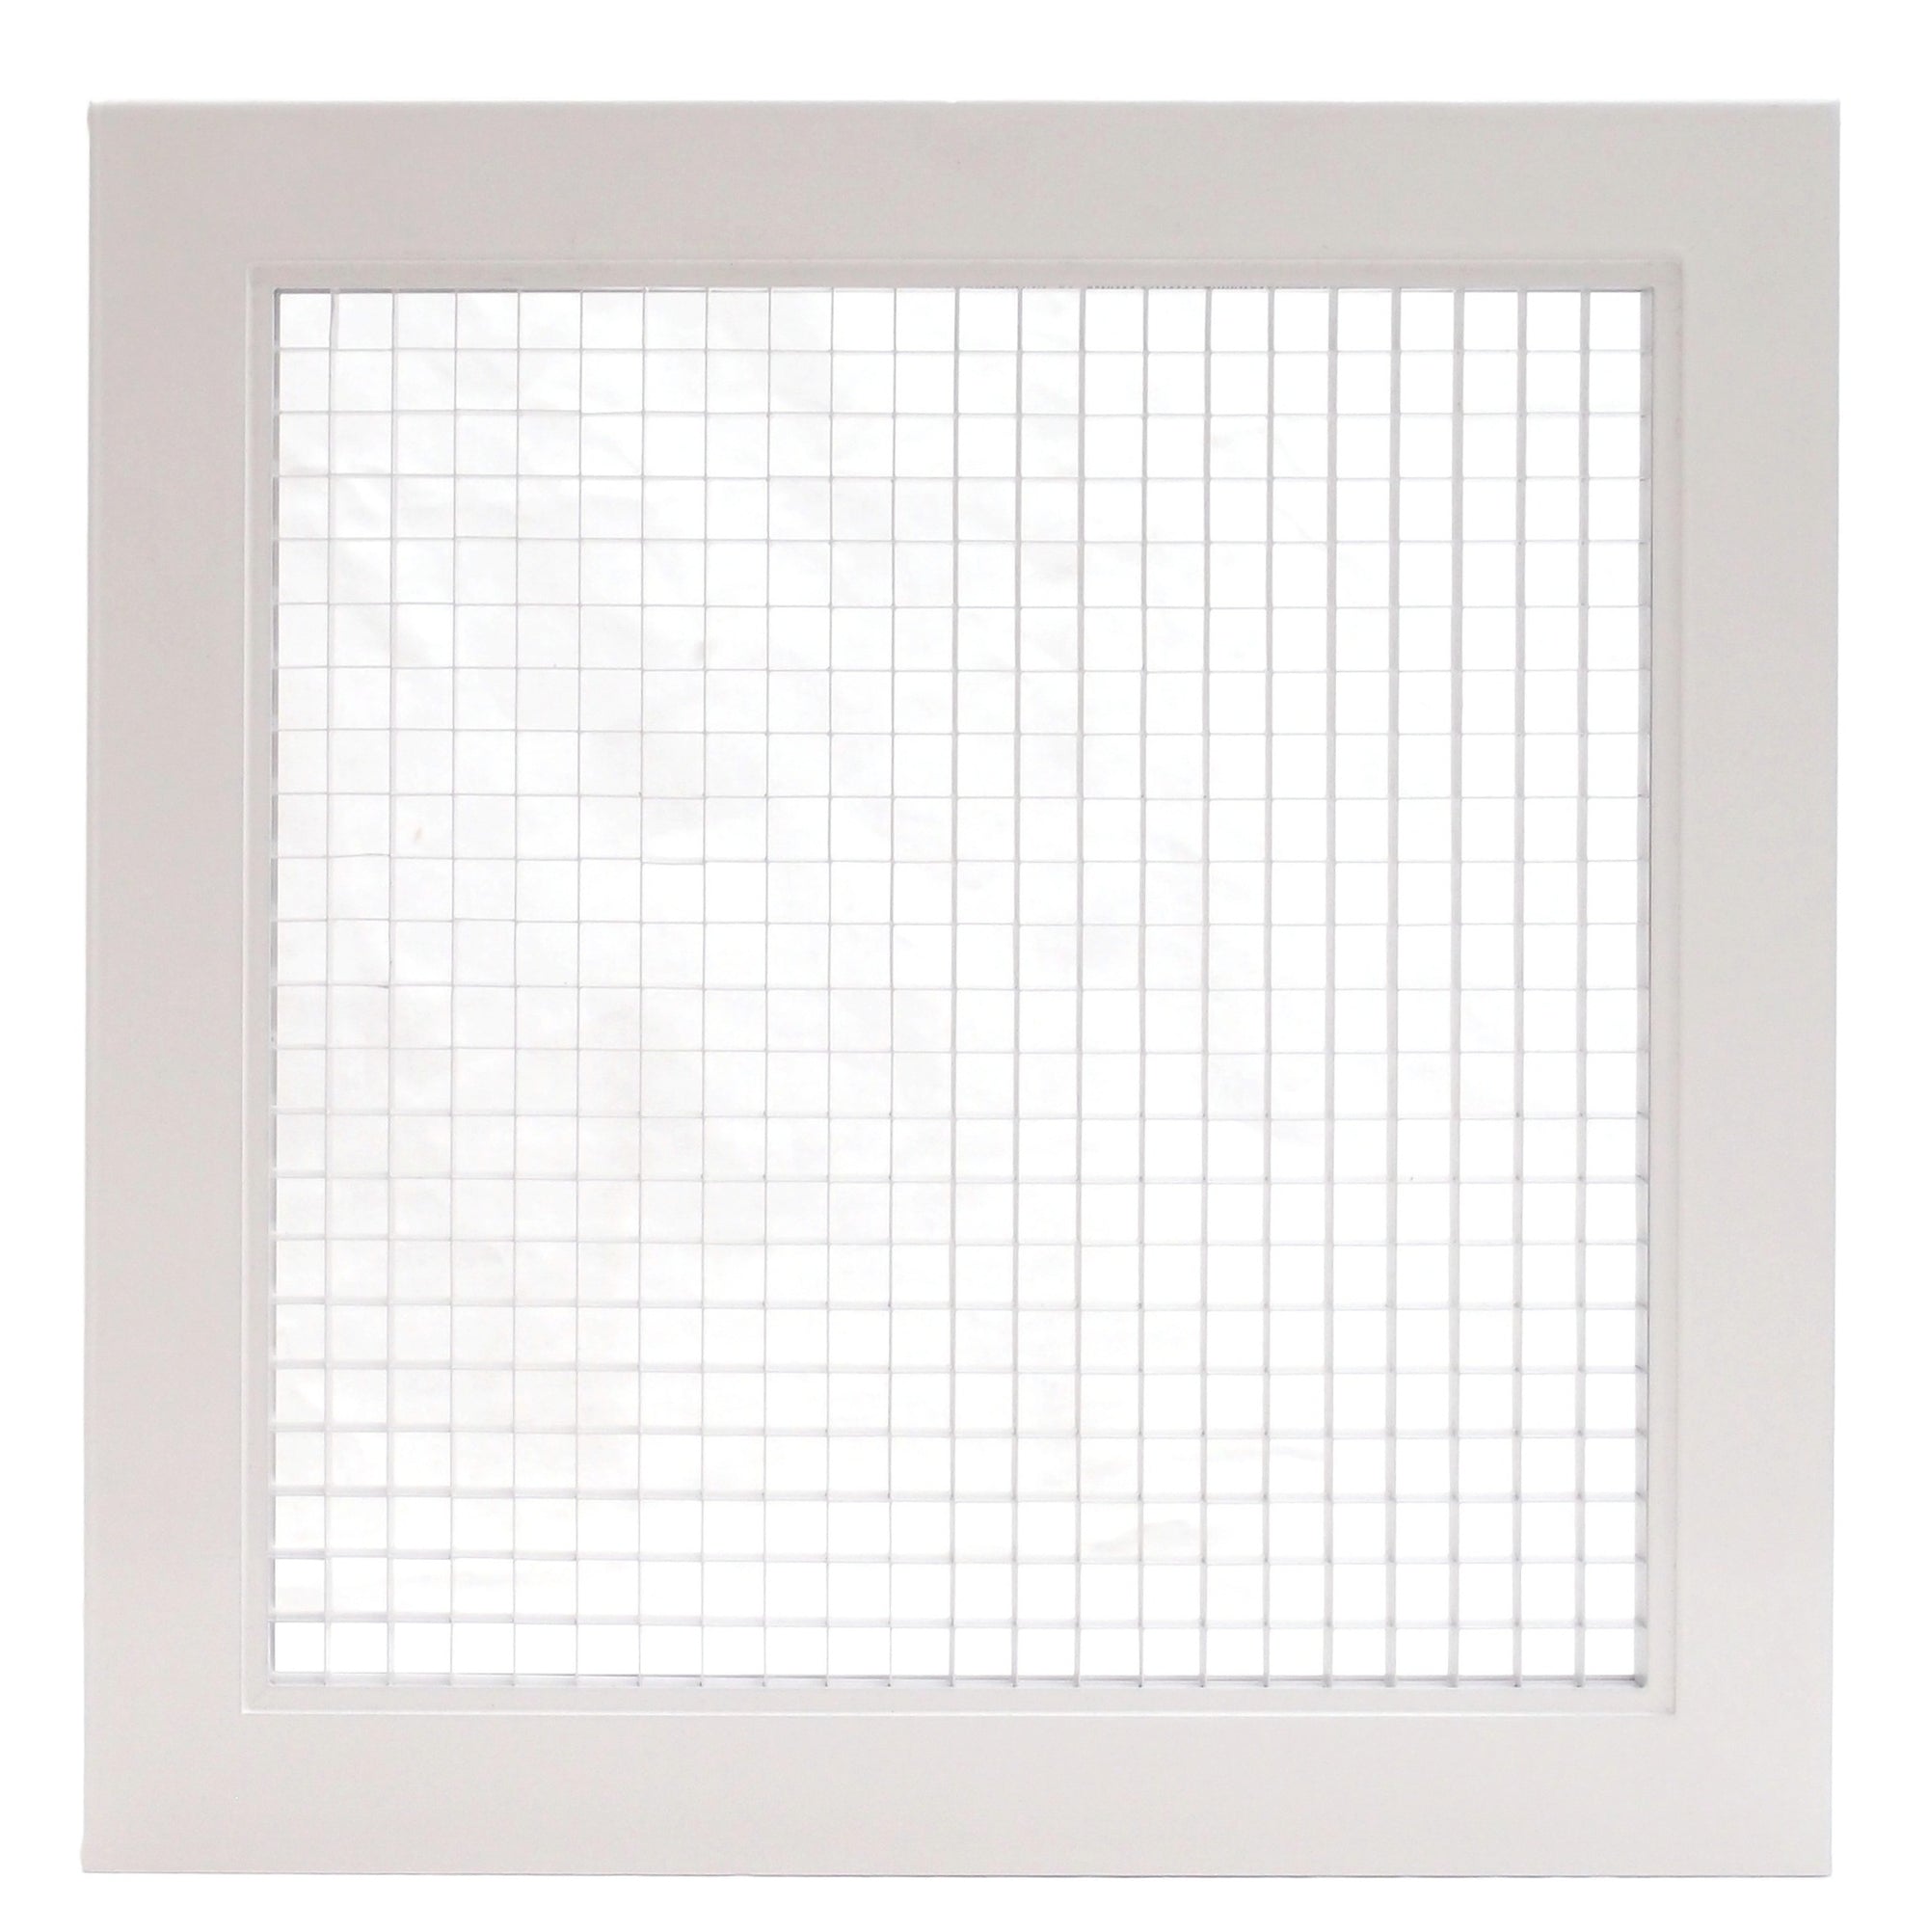 32" x 6" Cube Core Eggcrate Return Air Filter Grille for 1" Filter